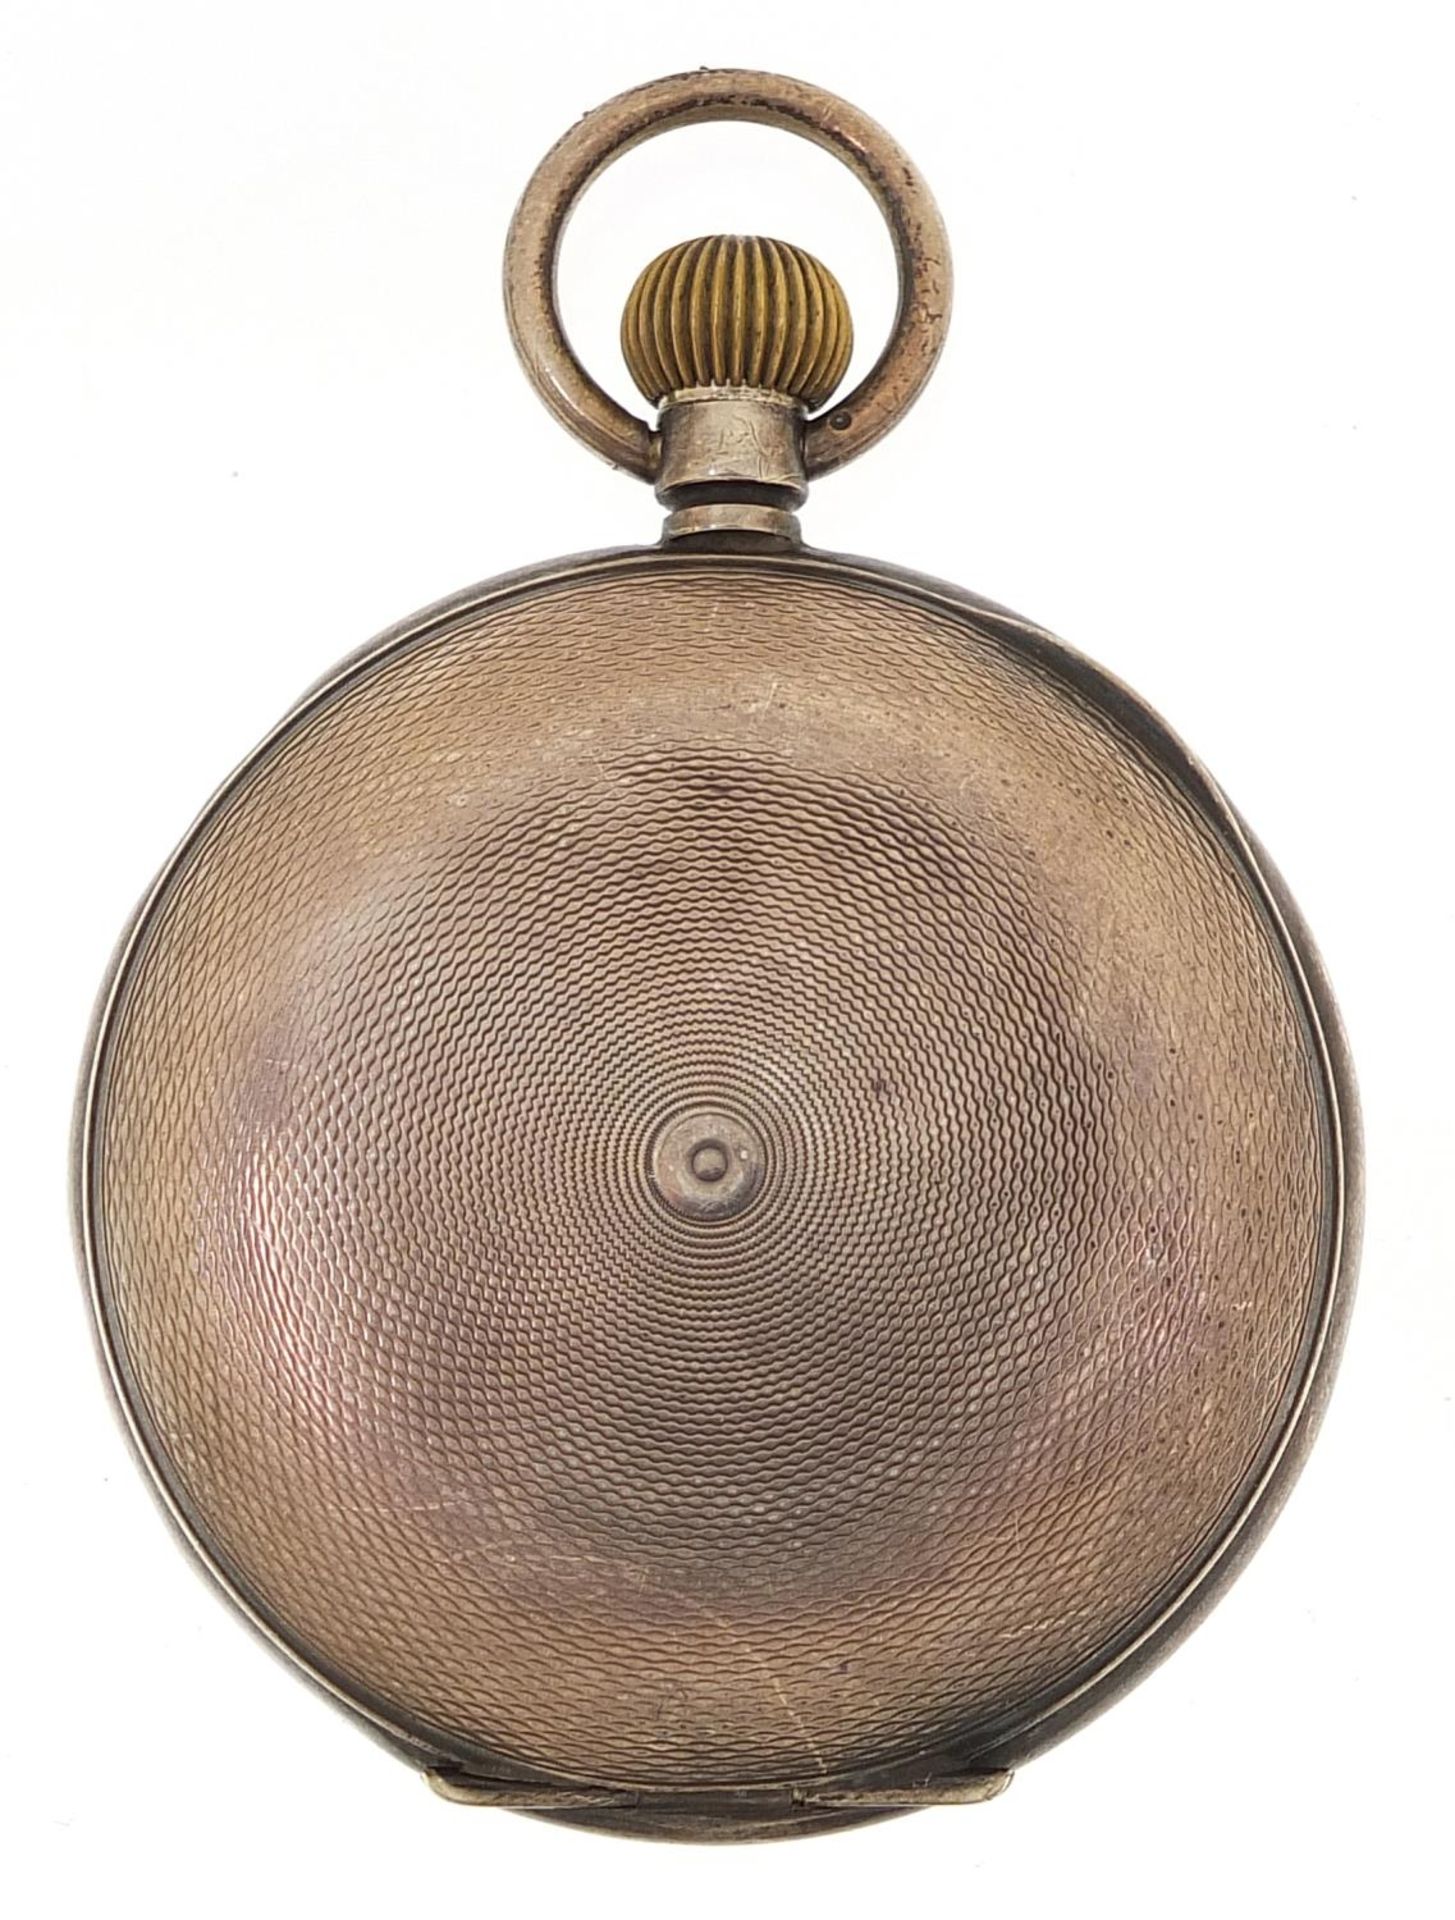 Hebdomas, silver full hunter pocket watch with enamelled dial, 50mm in diameter - Image 3 of 5